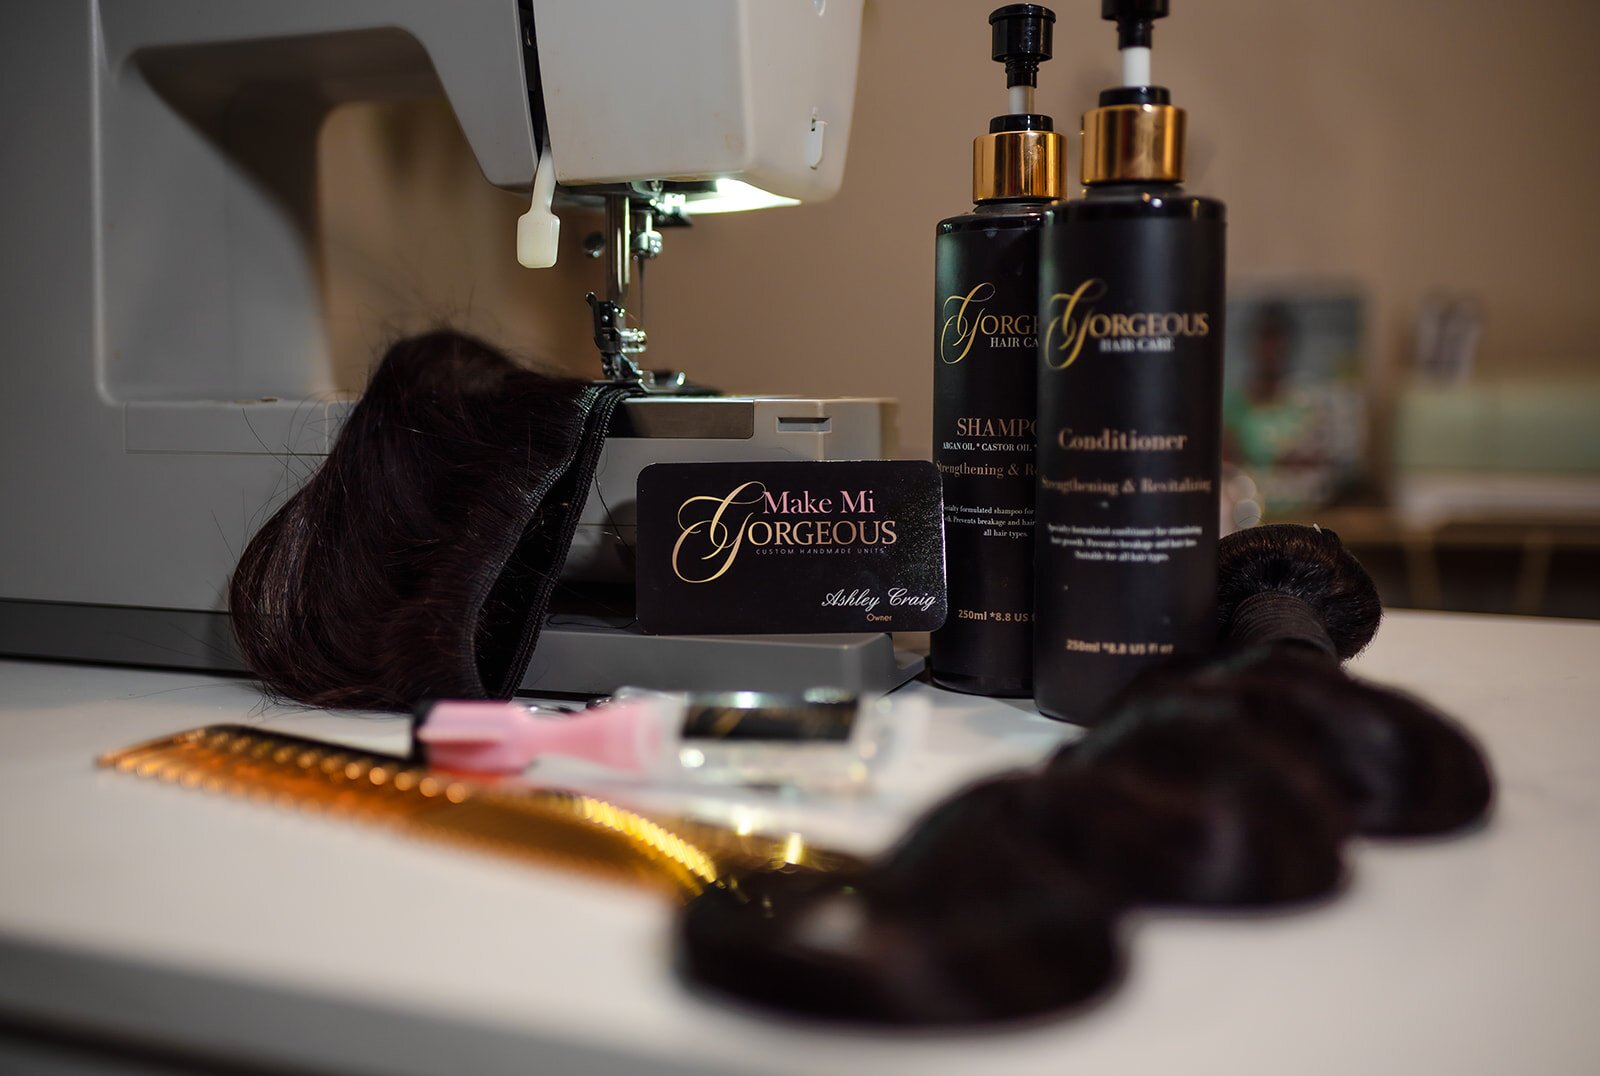 Tools and products used by Ashley Craig, owner of Make Mi Gorgeous.